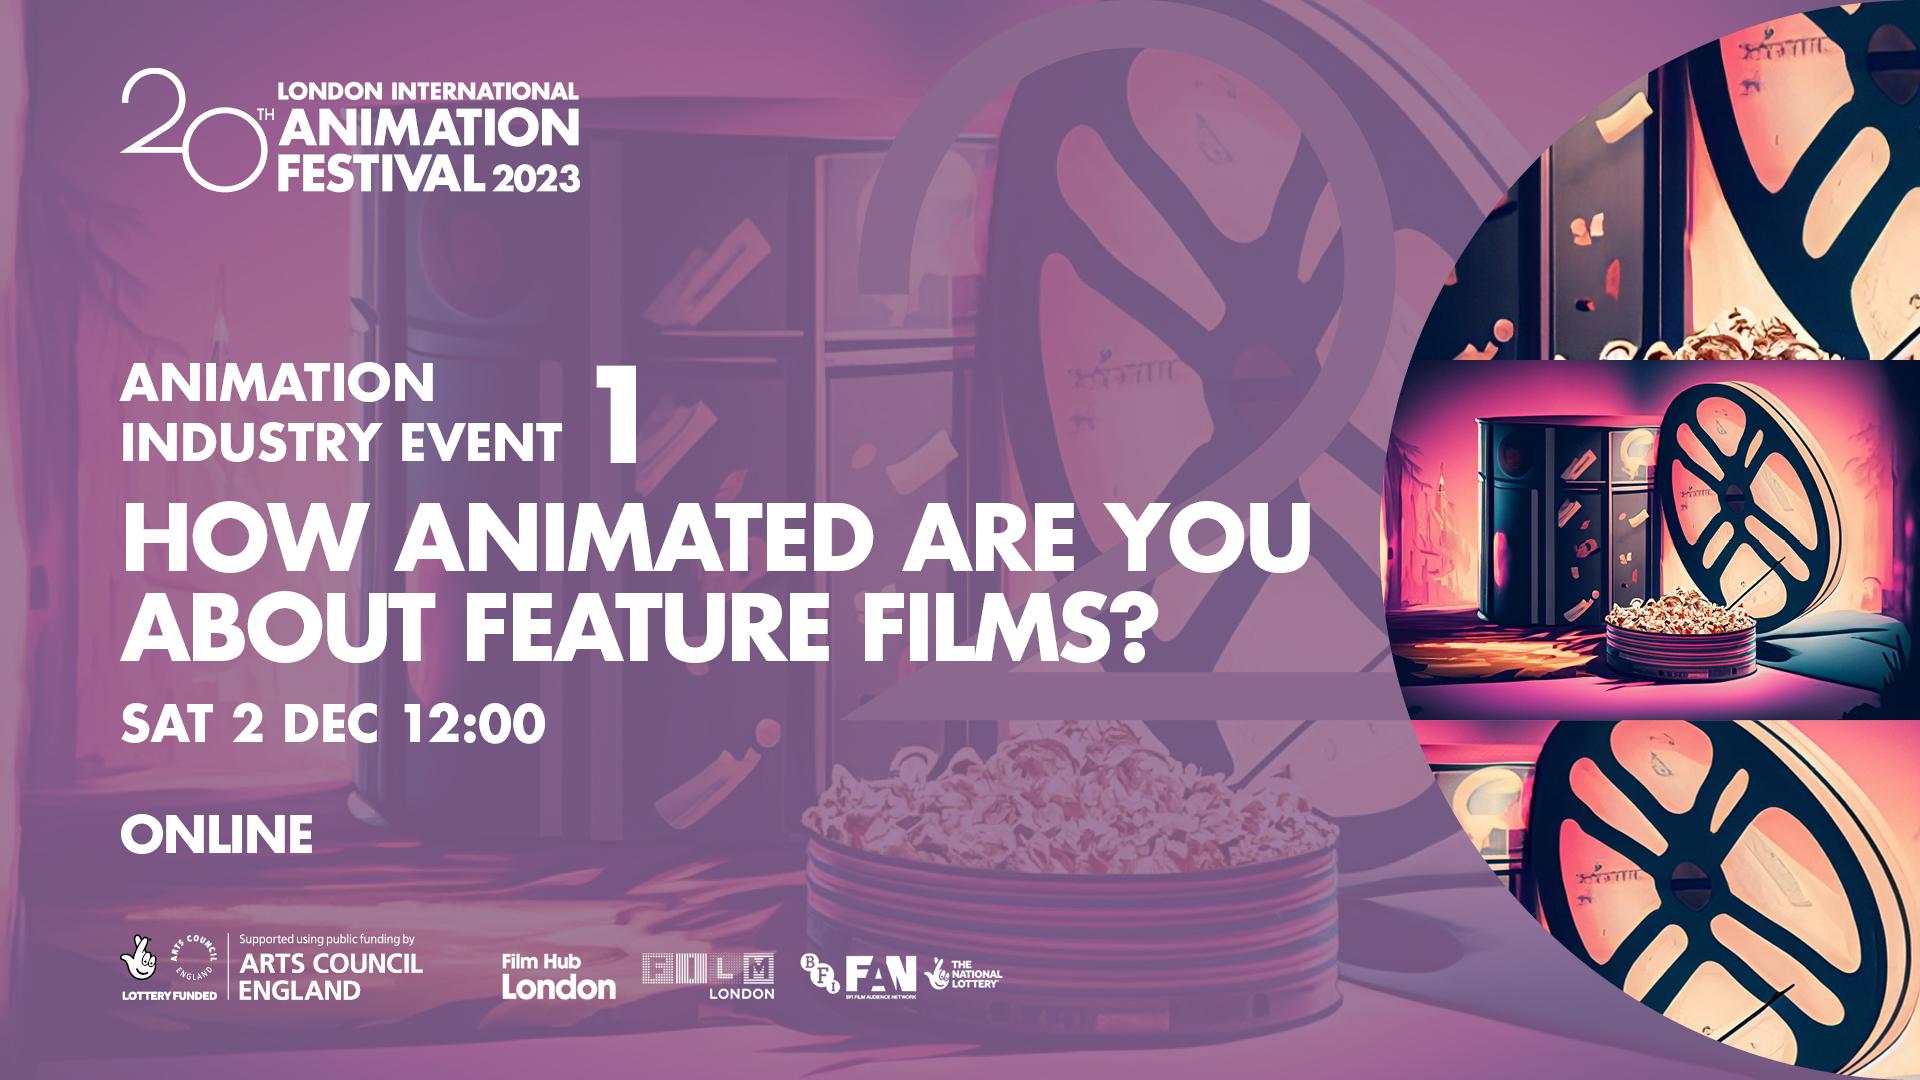 Animation Industry Event 1: How Animated are you about Feature Films?